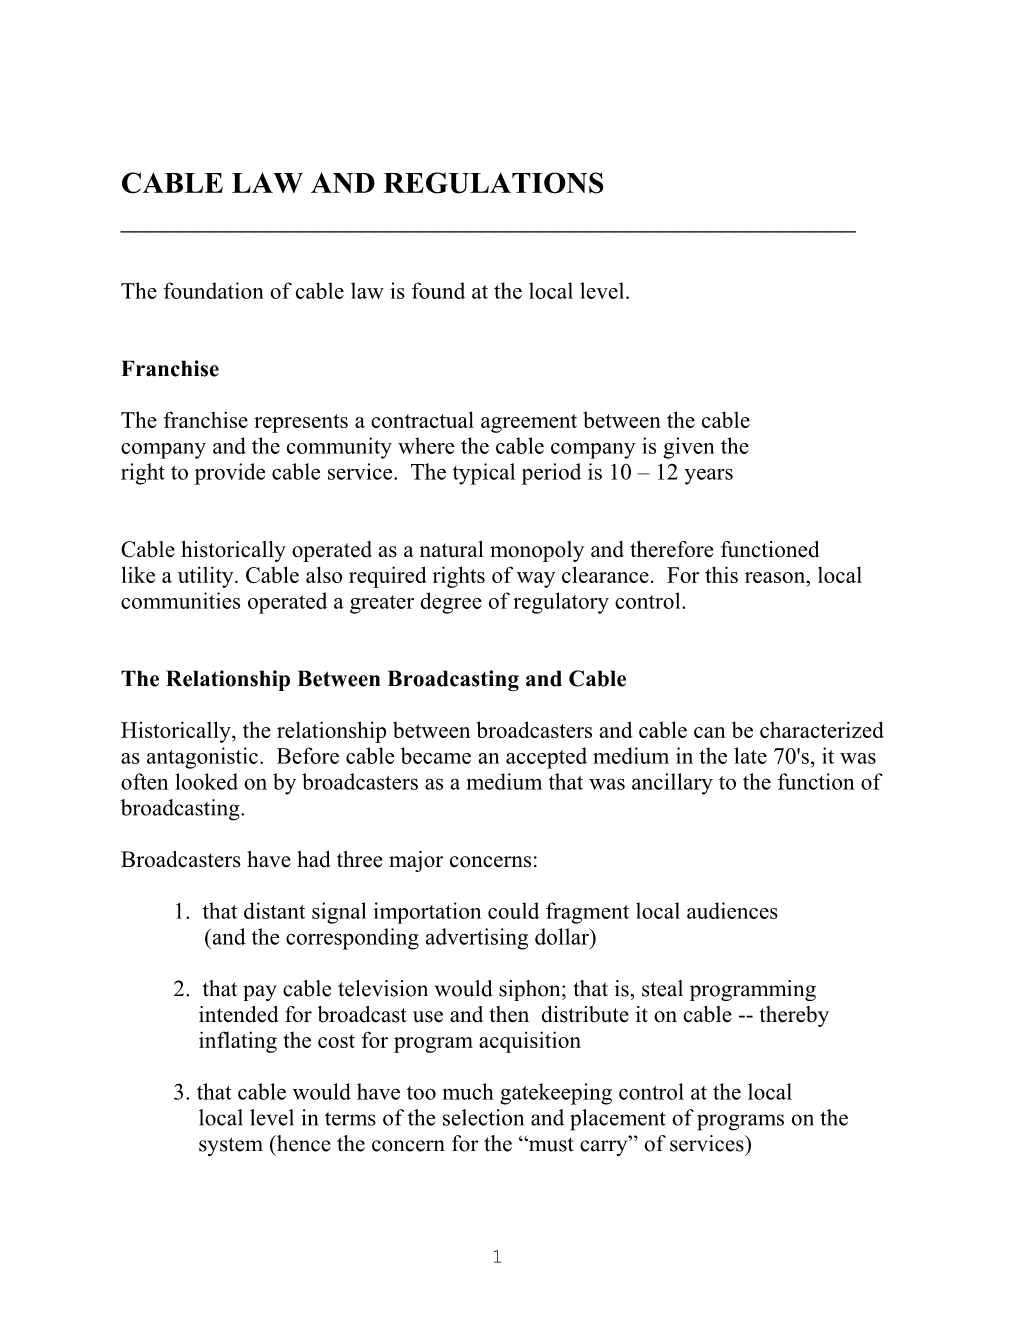 Cable Law and Regulations